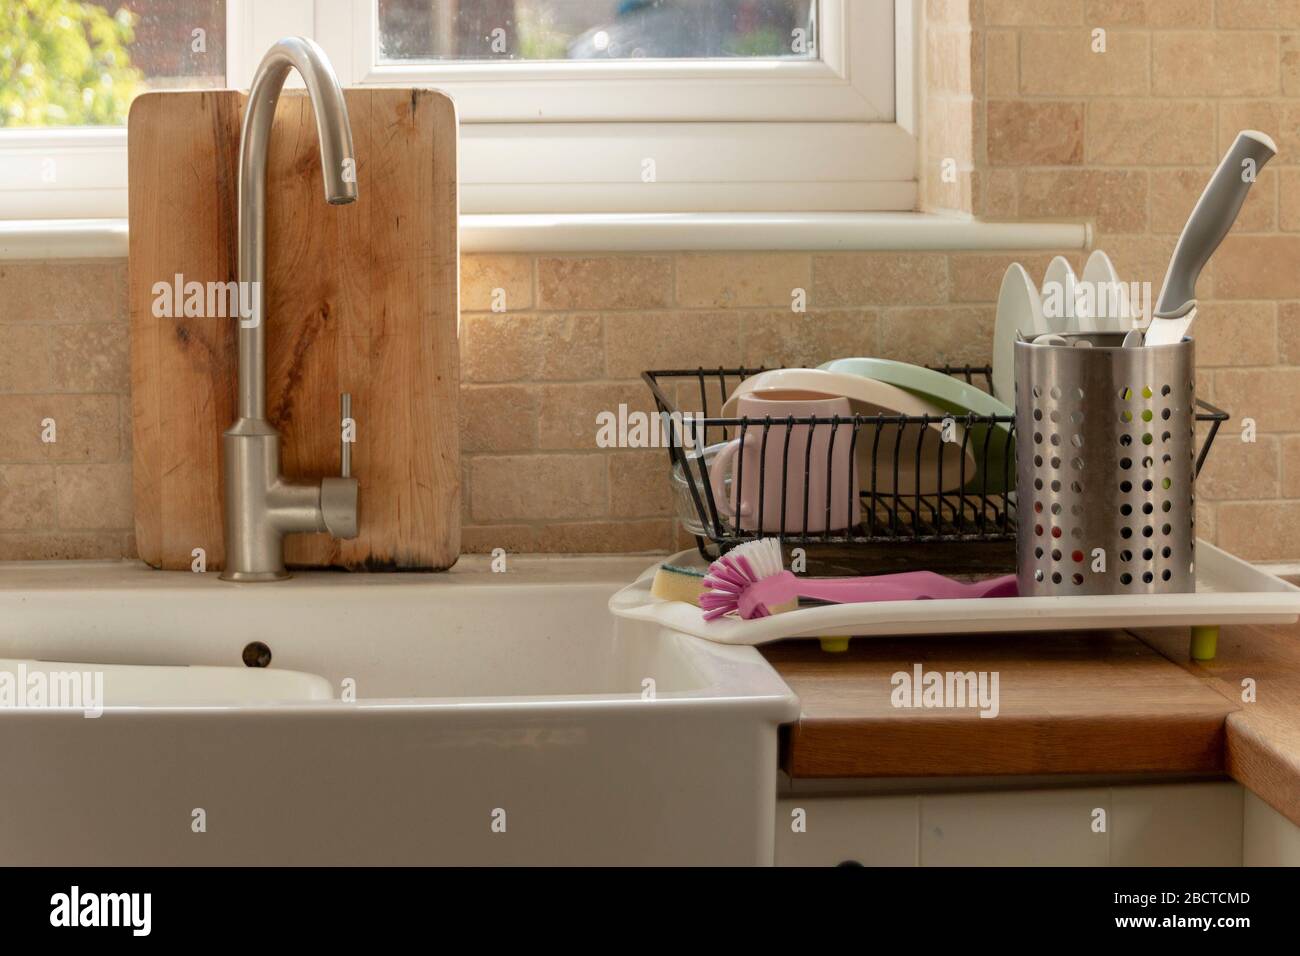 a close up view of clean dishing place in the drying rack in a open plan kitchen Stock Photo